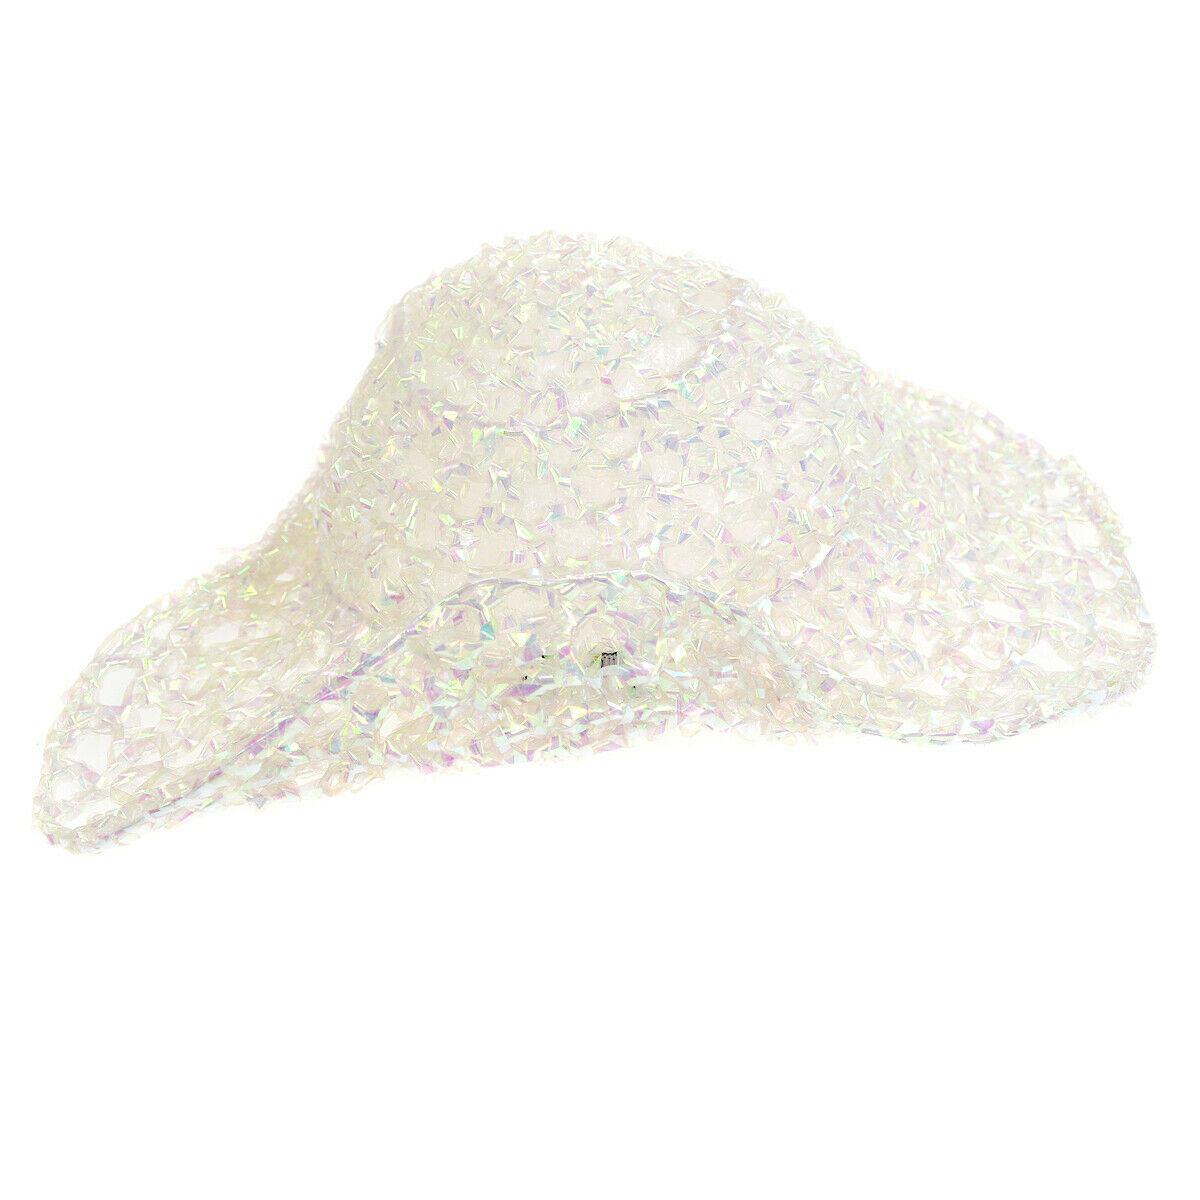 Chanel 1995 Spring Runway Vintage Iridescent Clear Transparent Woven Barbie Hat For Sale 6